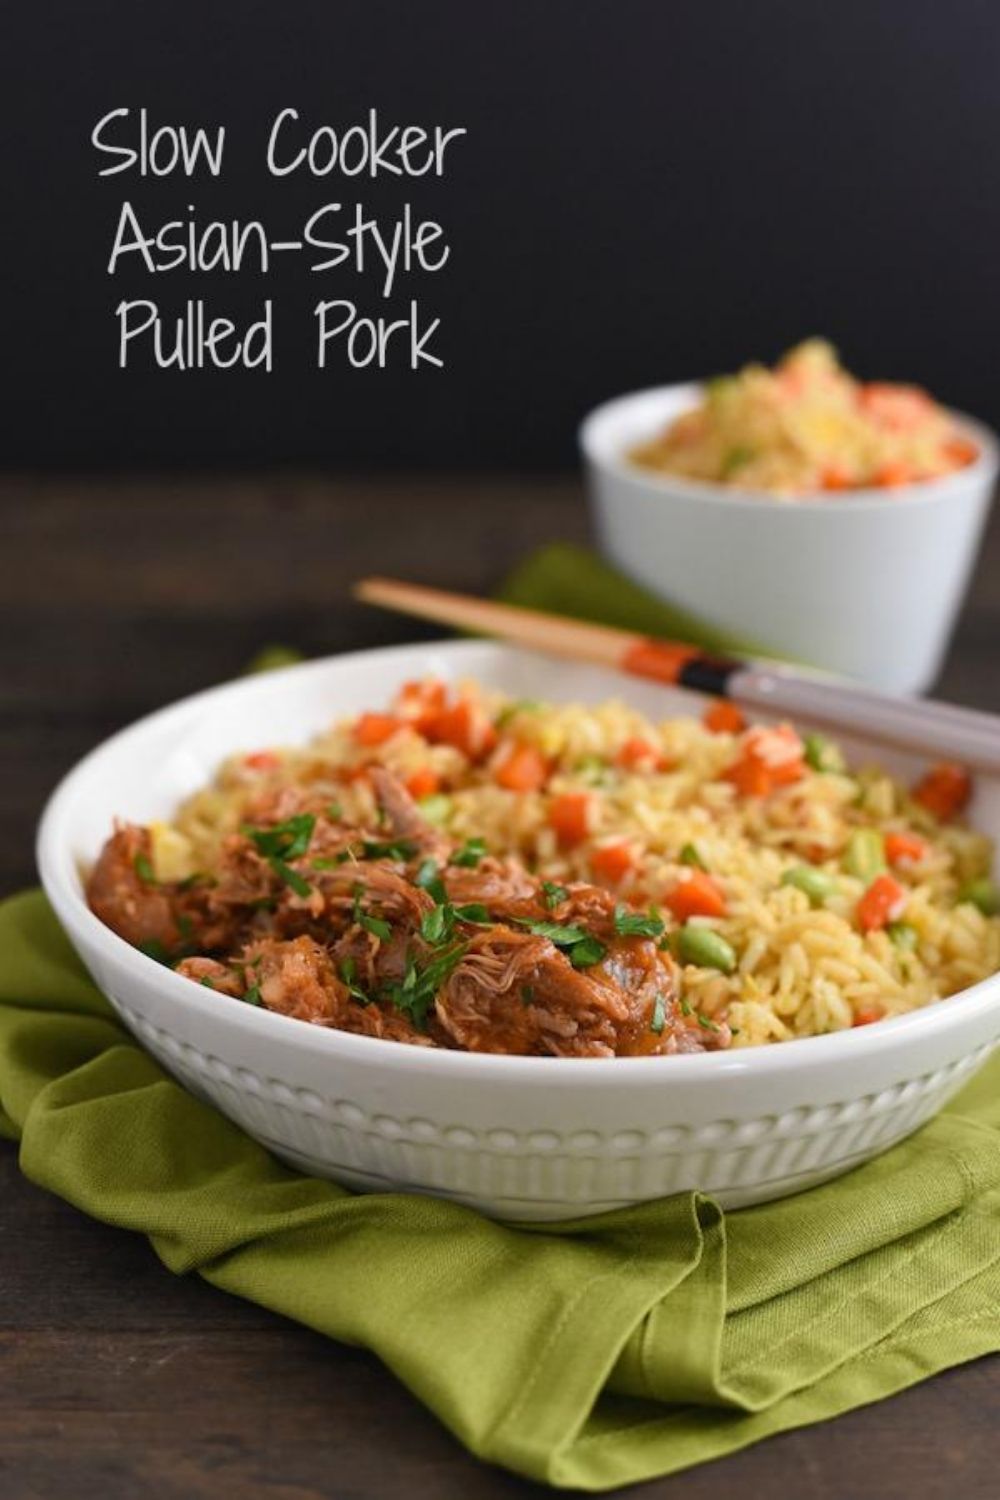 Slow Cooker Asian-Style Pulled Pork.